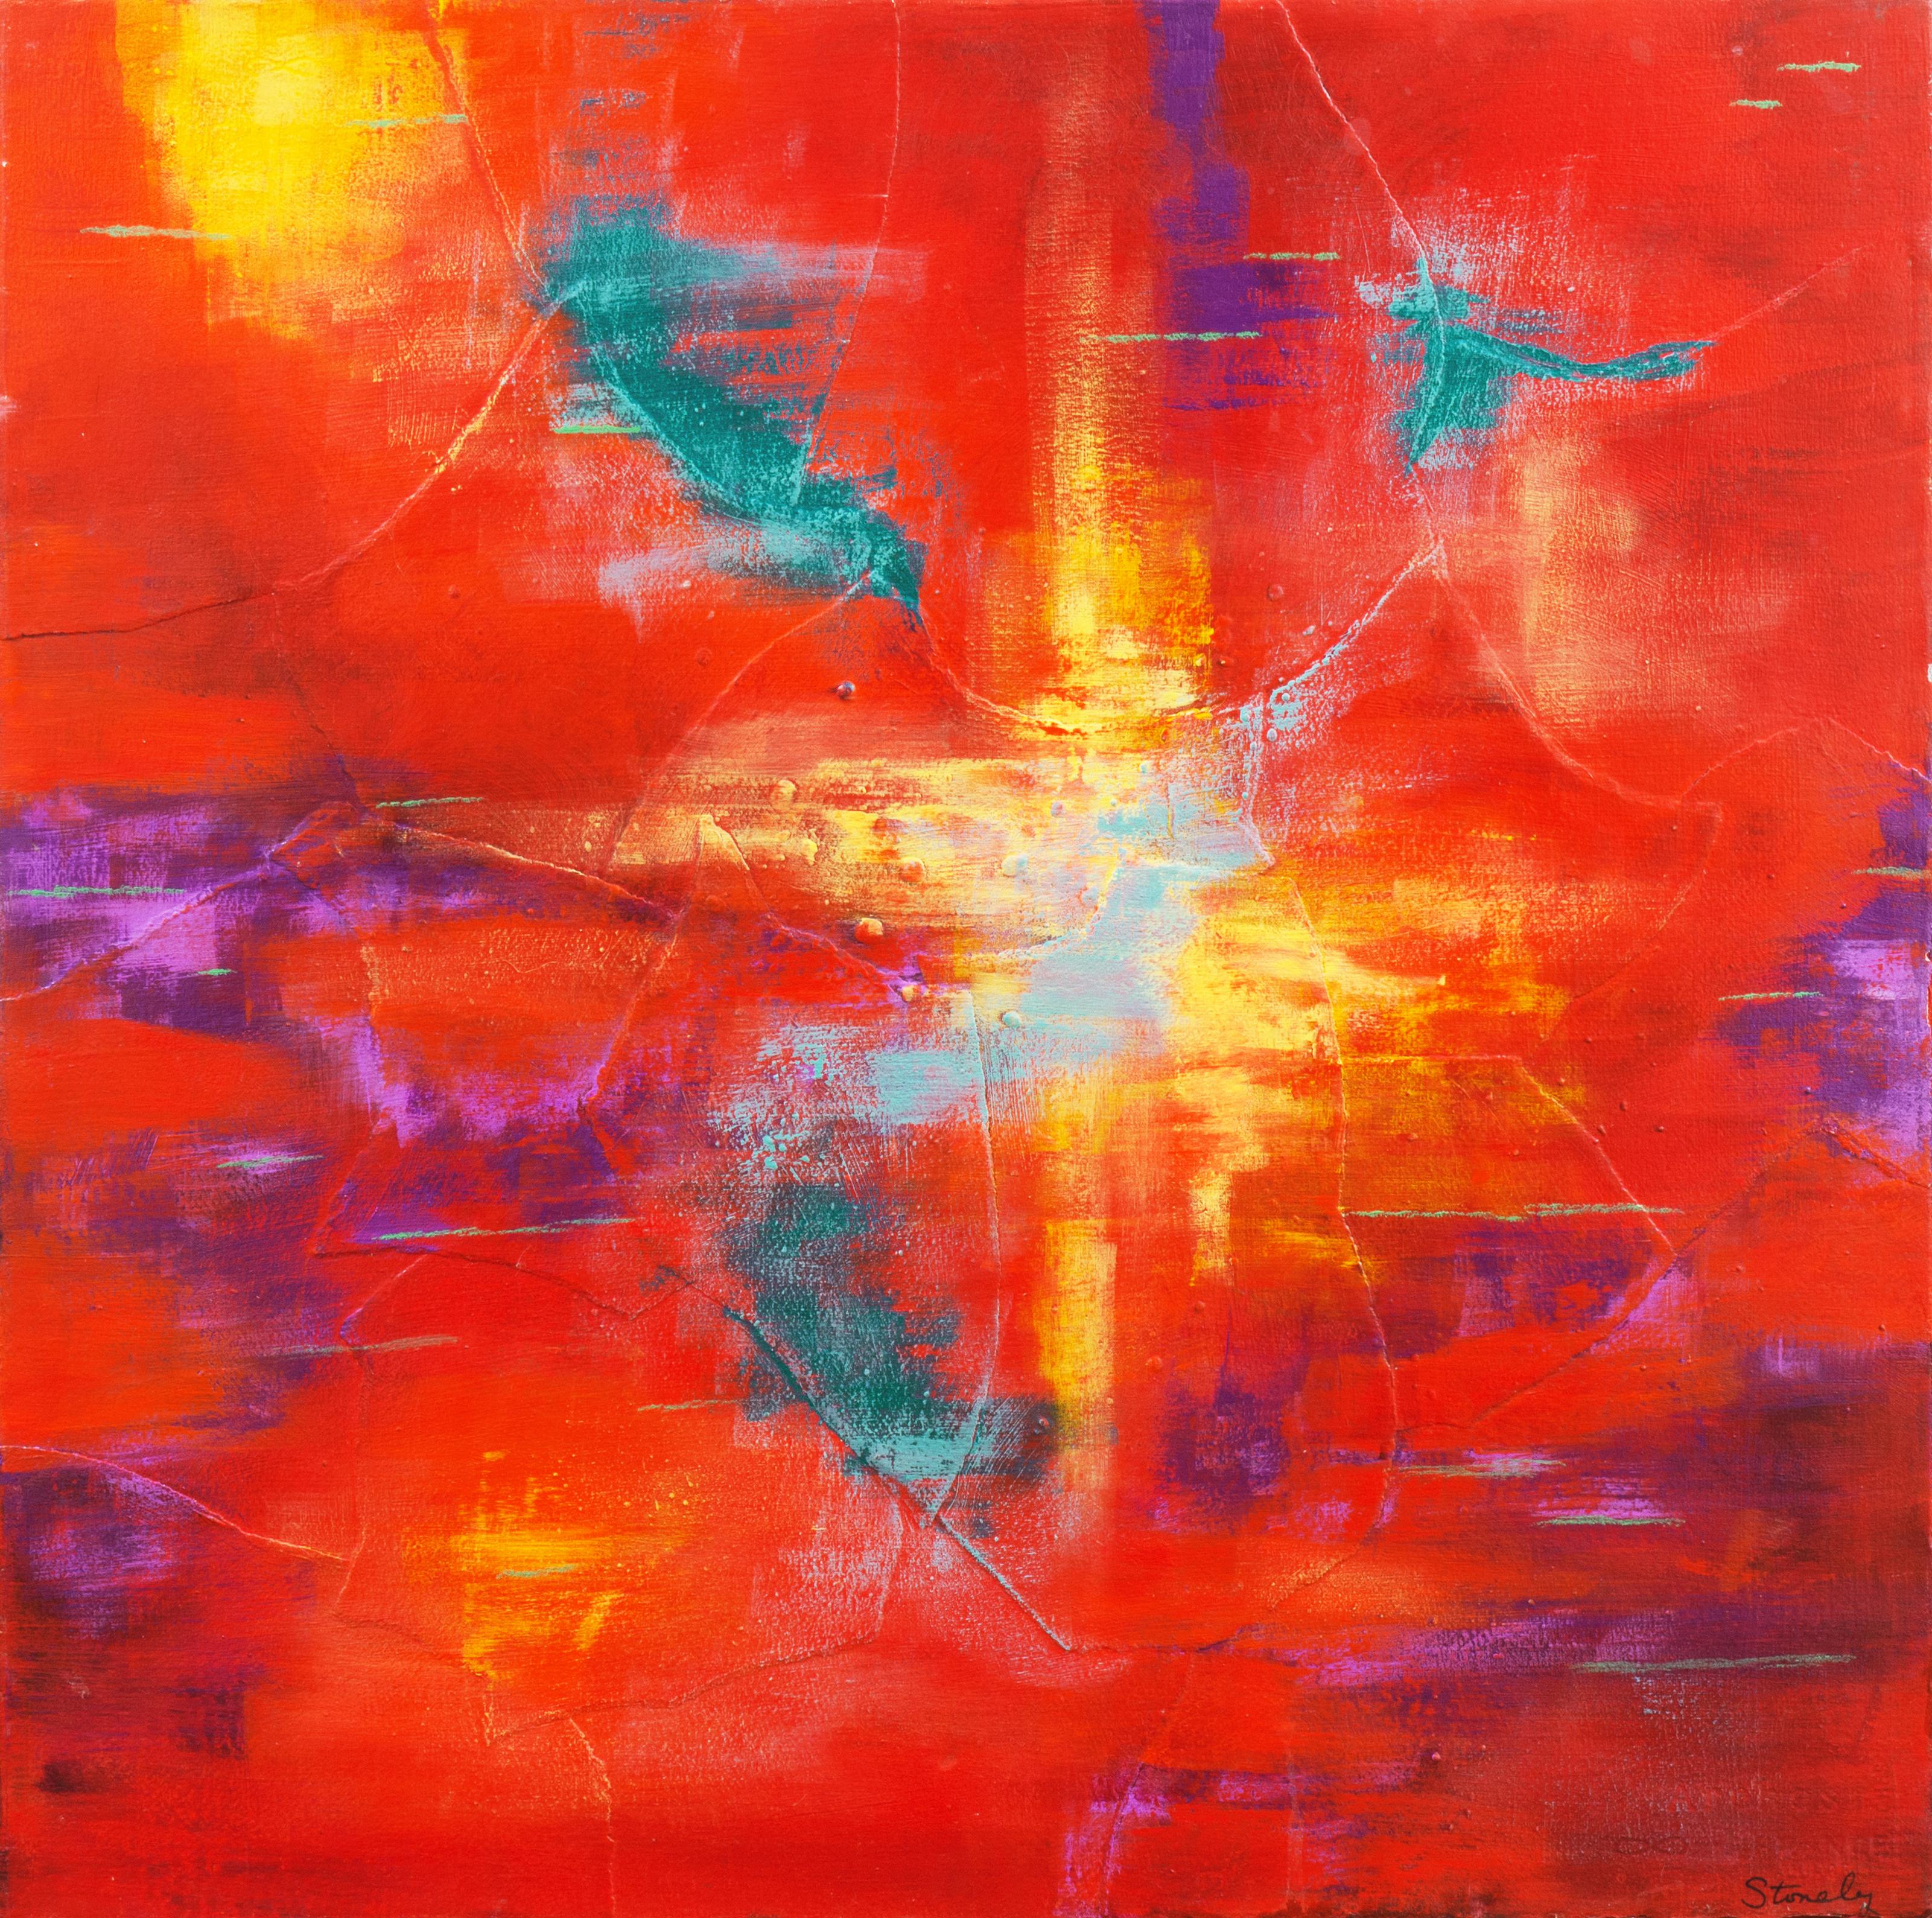 'Abstract in Coral and Scarlet', Künstlerin, Pacific Grove Art Association